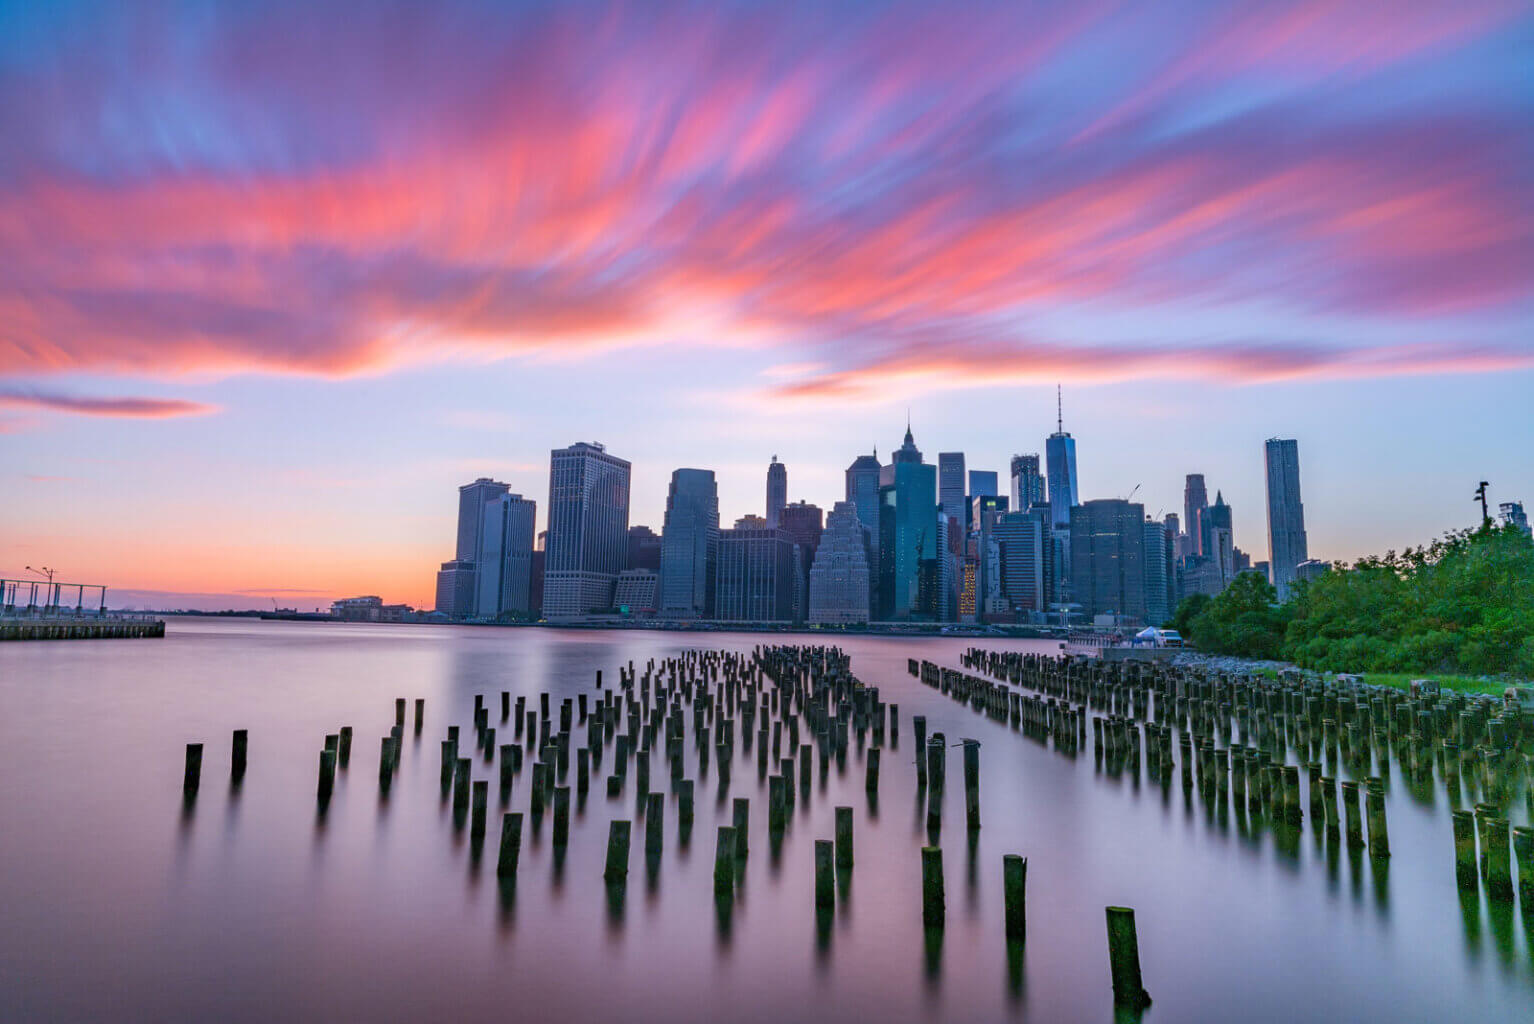 Iconic image of Manhattan Skyline During Sunset with Poles in the water